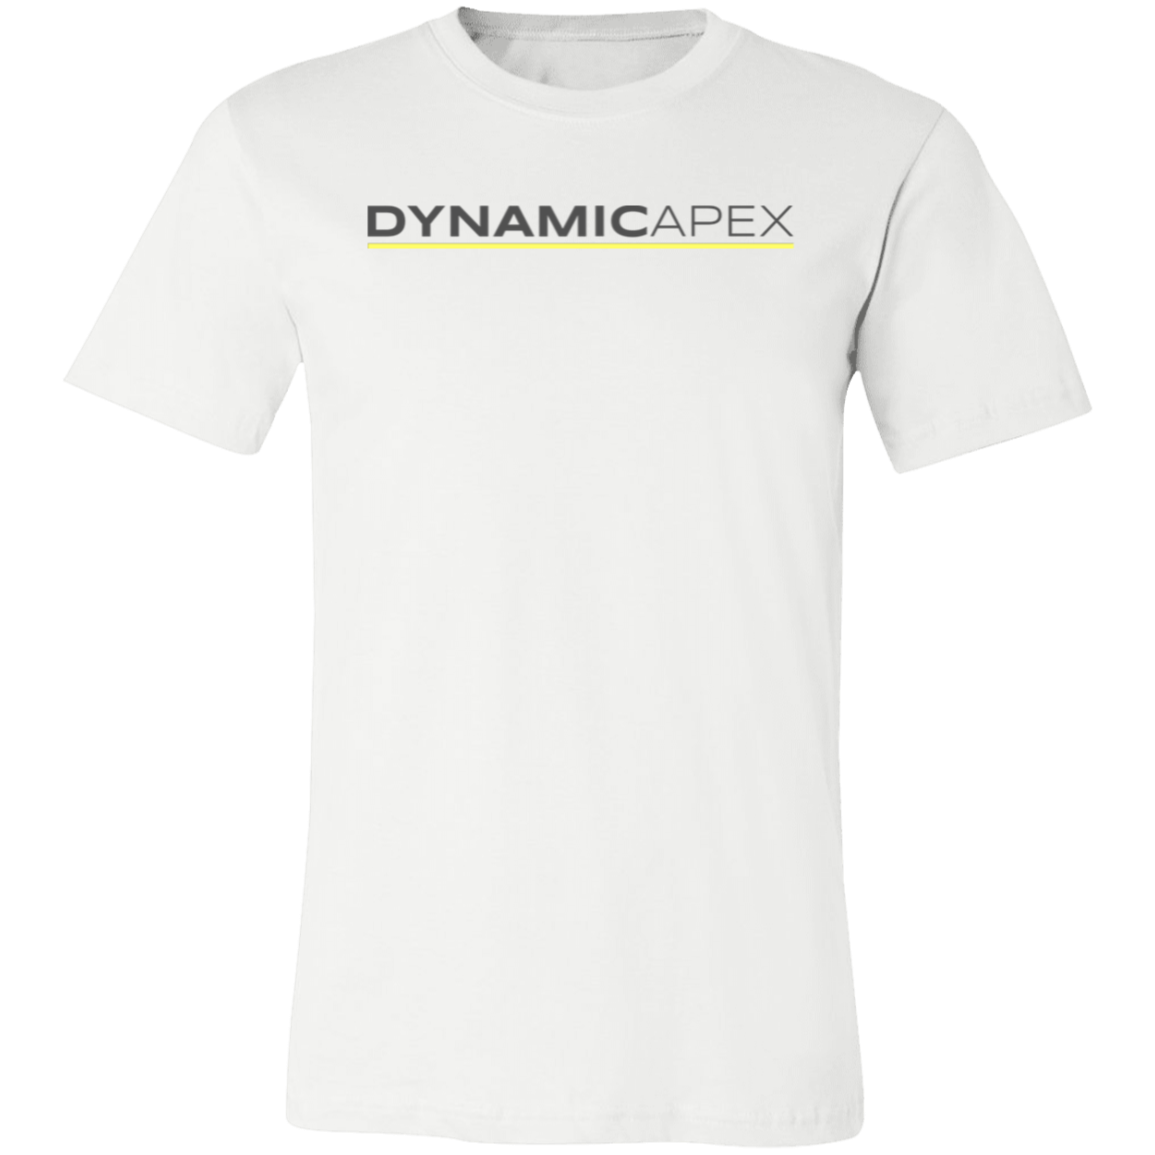 DYNAMICAPEX Tee - White